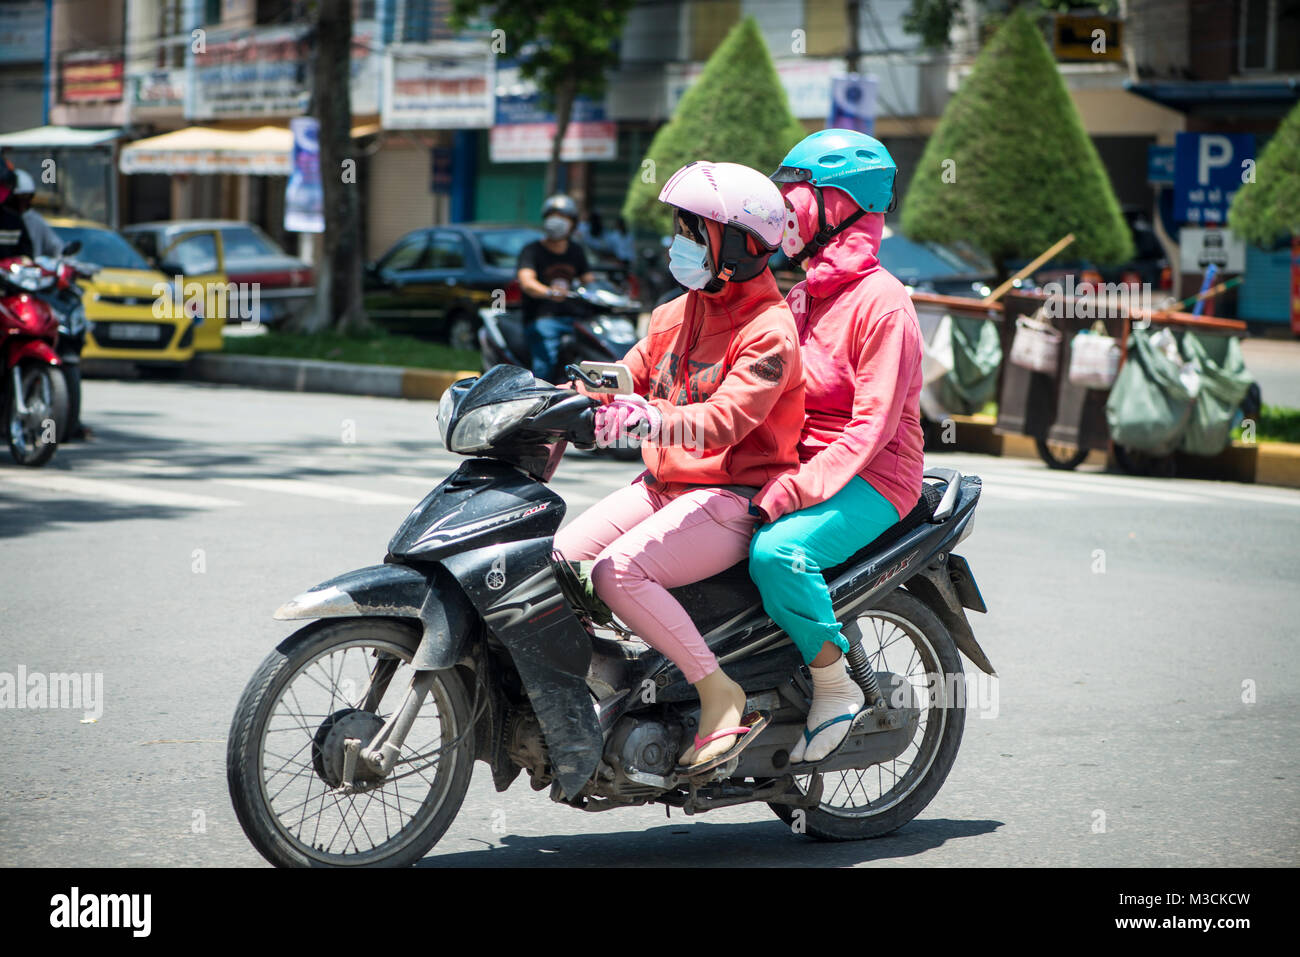 Two women on a motorcycle, Vietnam Stock Photo